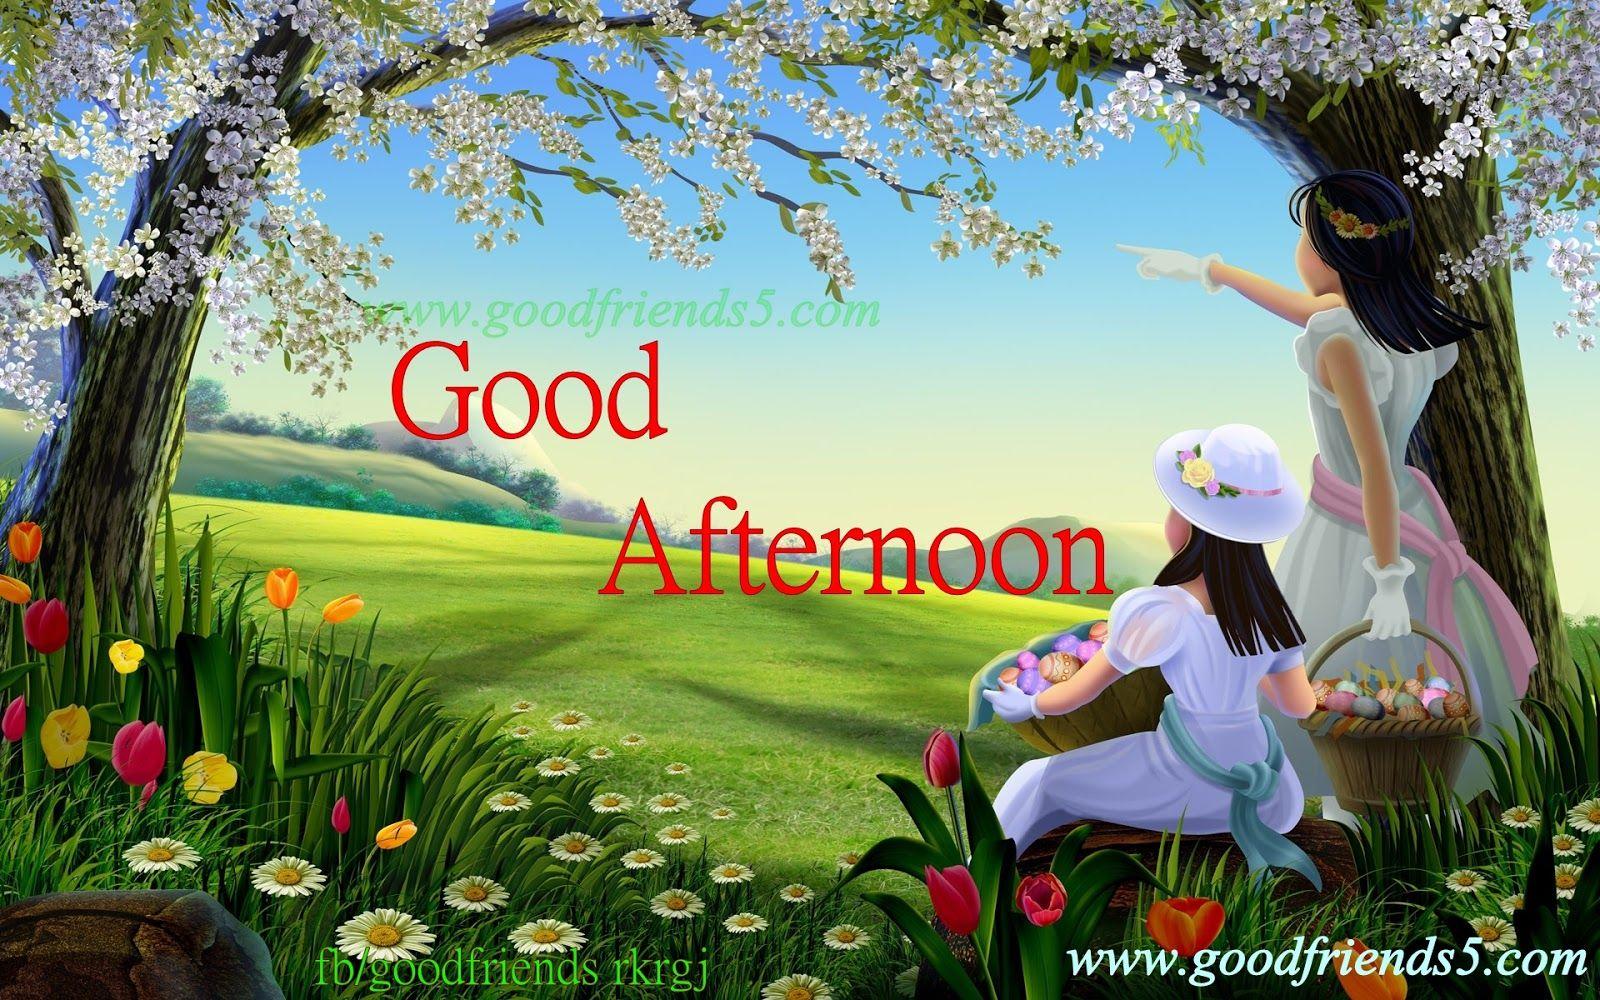 Best Good Afternoon wishes greetings and quotes GoodFriends5